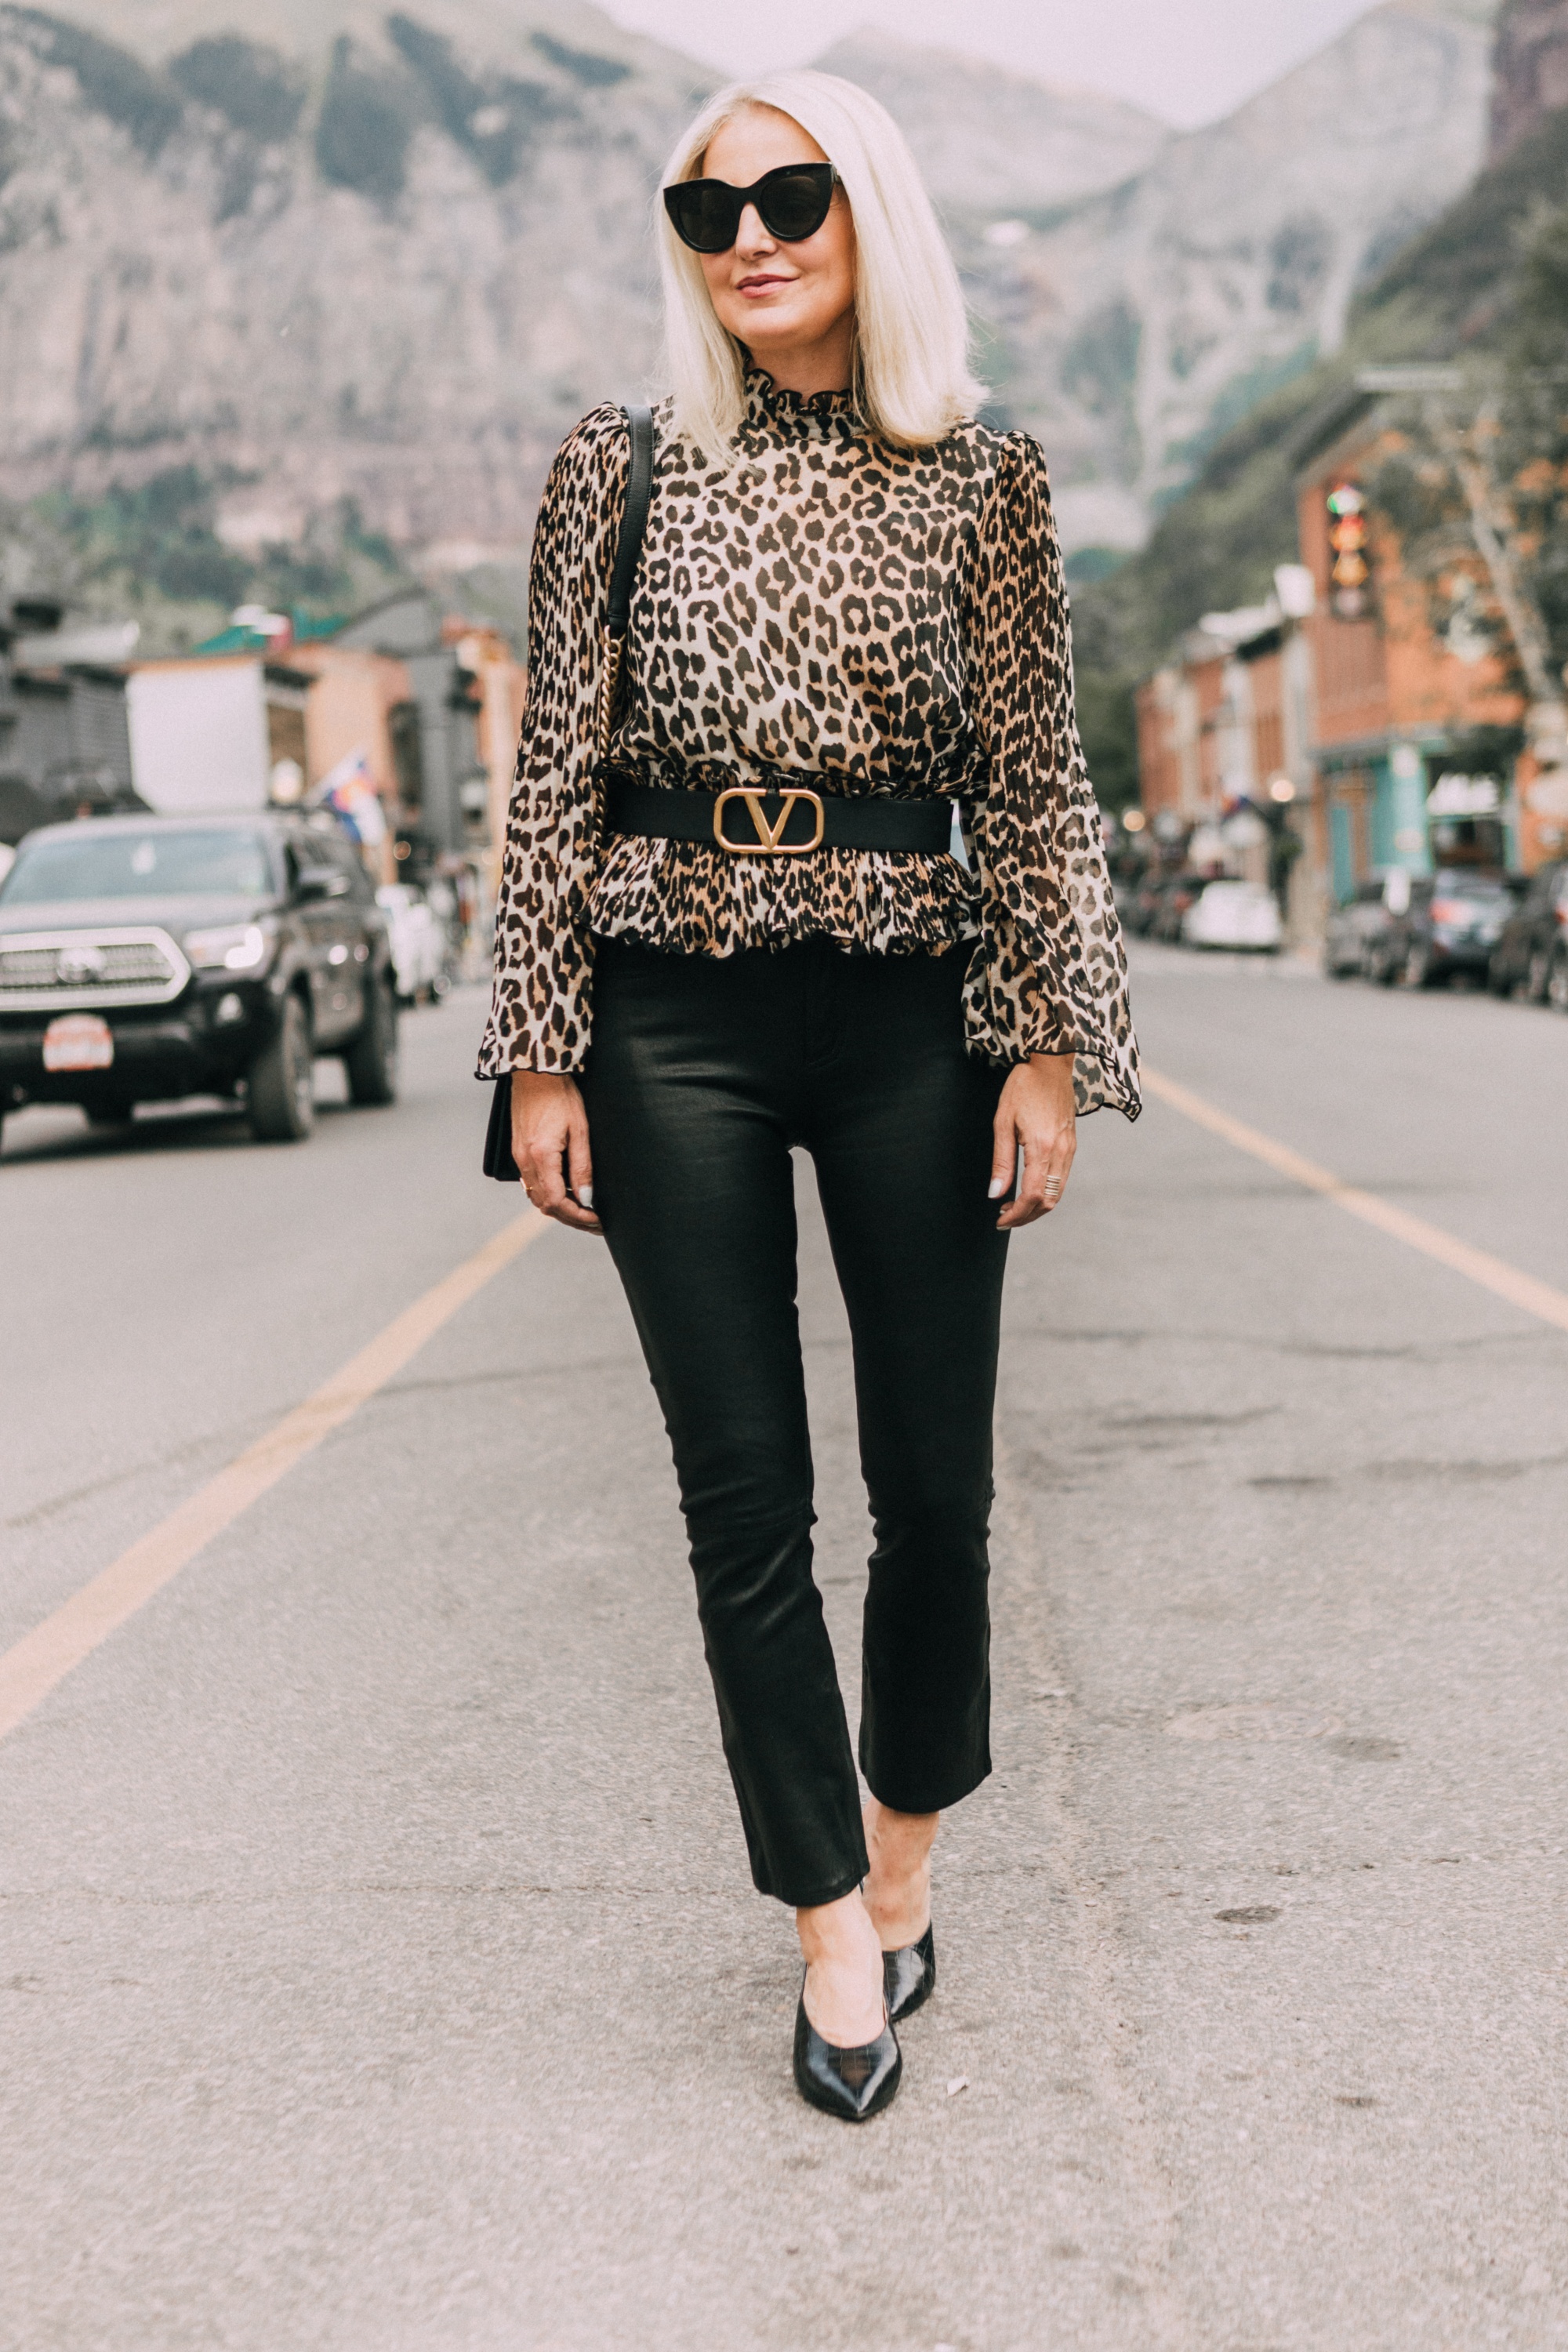 High Neckline Tops, fashion blogger Erin Busbee of BusbeeStyle.com wearing a high neck leopard print blouse by Ganni with black leather pants, Valentino belt, and black croc embossed mules in Telluride, CO